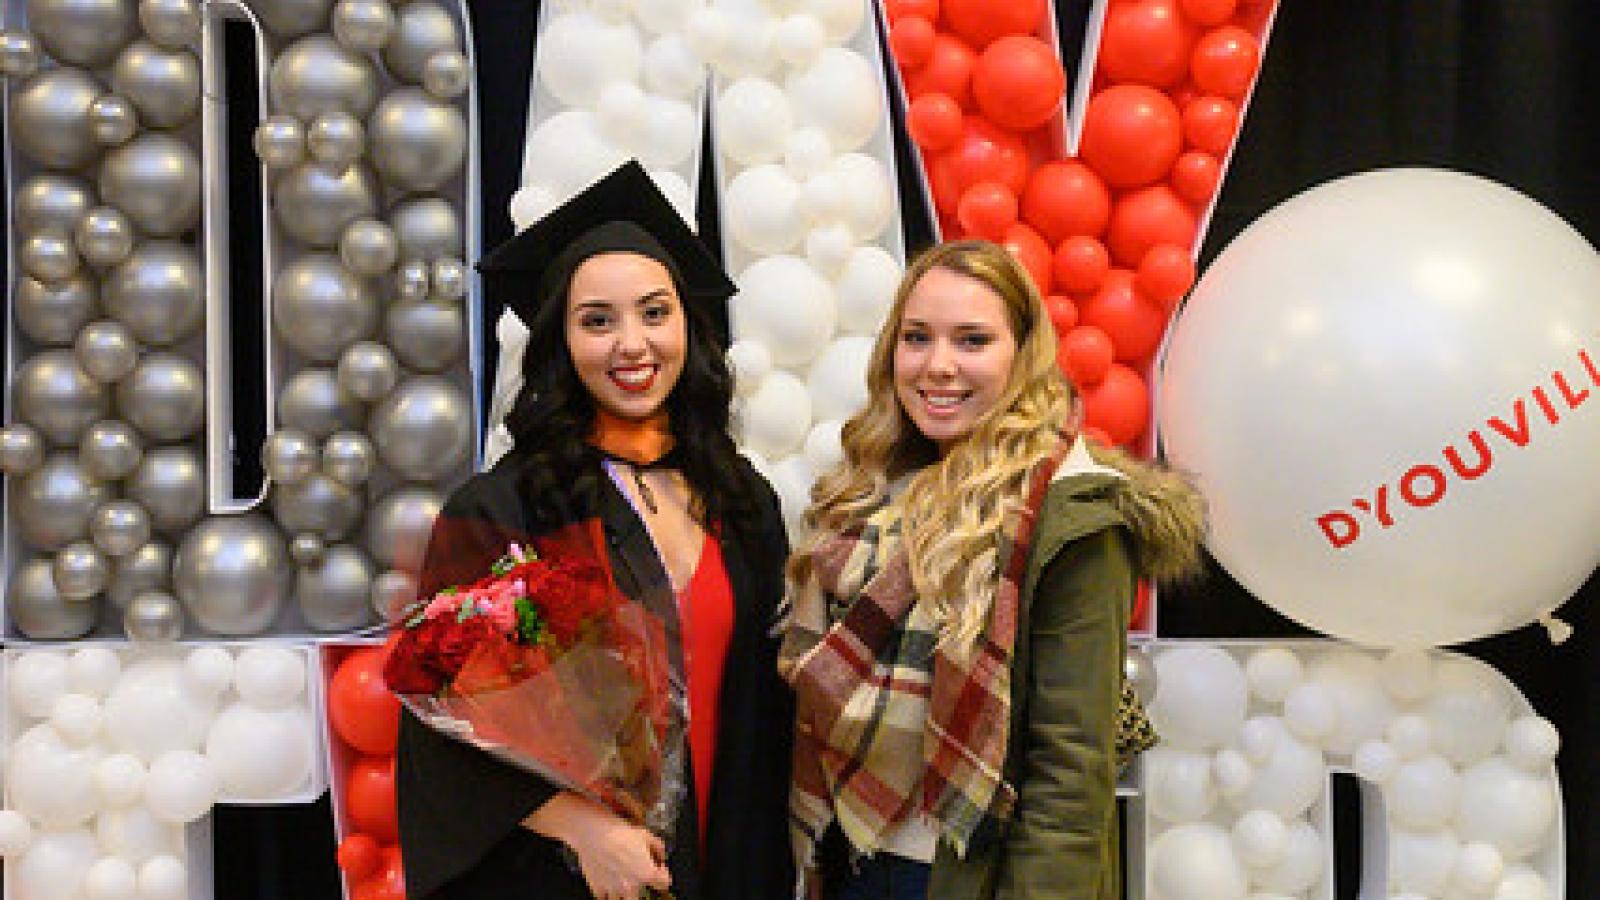 Two female students stand in front of a Best Day ever balloon display.